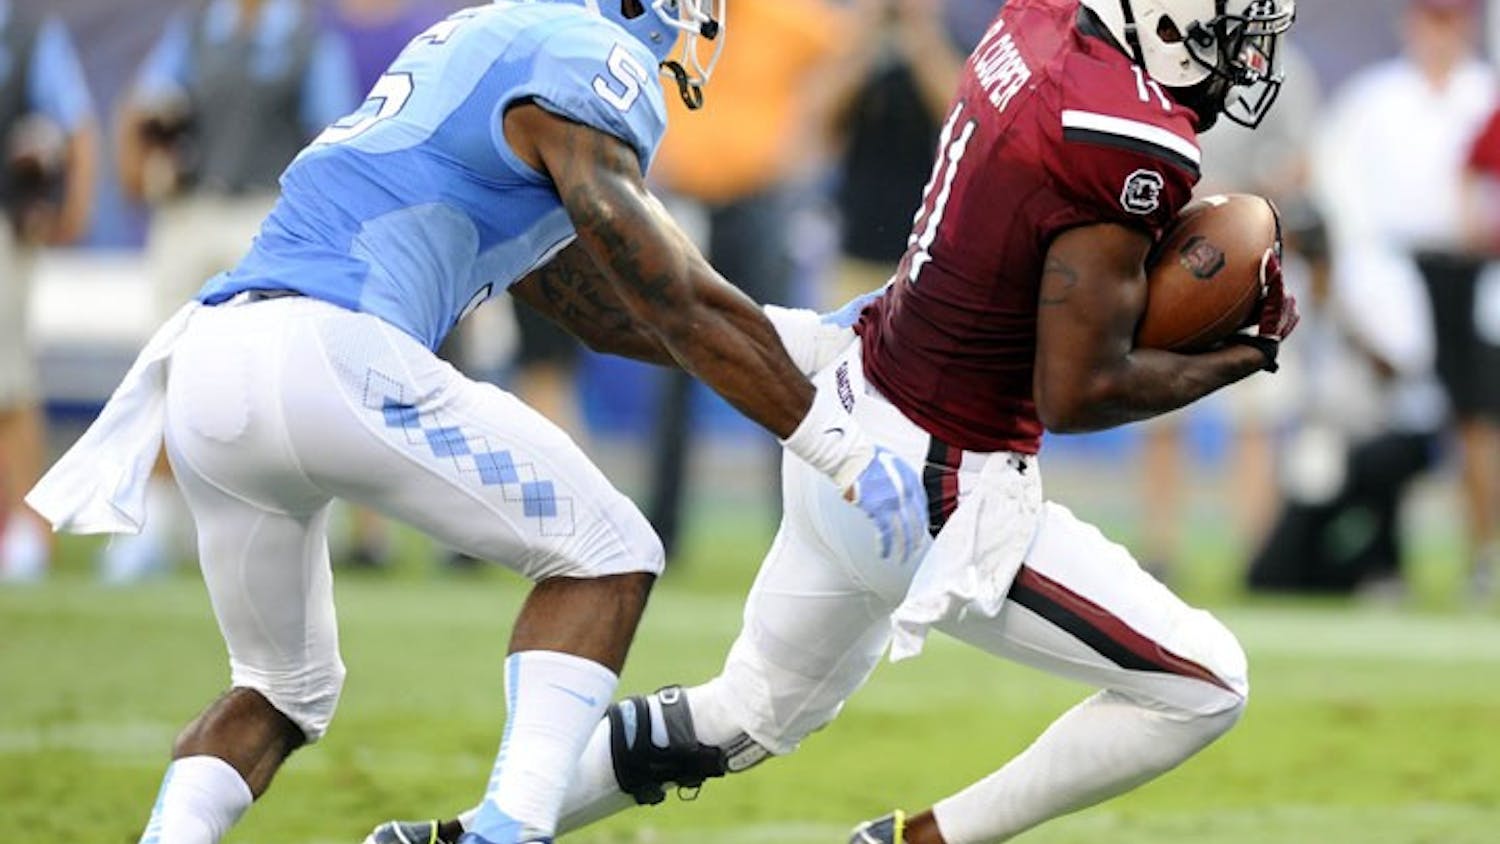 South Carolina wide receiver Pharoh Cooper (11) runs past North Carolina&apos;s Juval Mollette (5) on his way to a 9-yard touchdown during the first half in the Belk College Kickoff at Bank of America Stadium in Charlotte, N.C., on Thursday, Sept. 3, 2015. (David T. Foster III/Charlotte Observer/TNS)